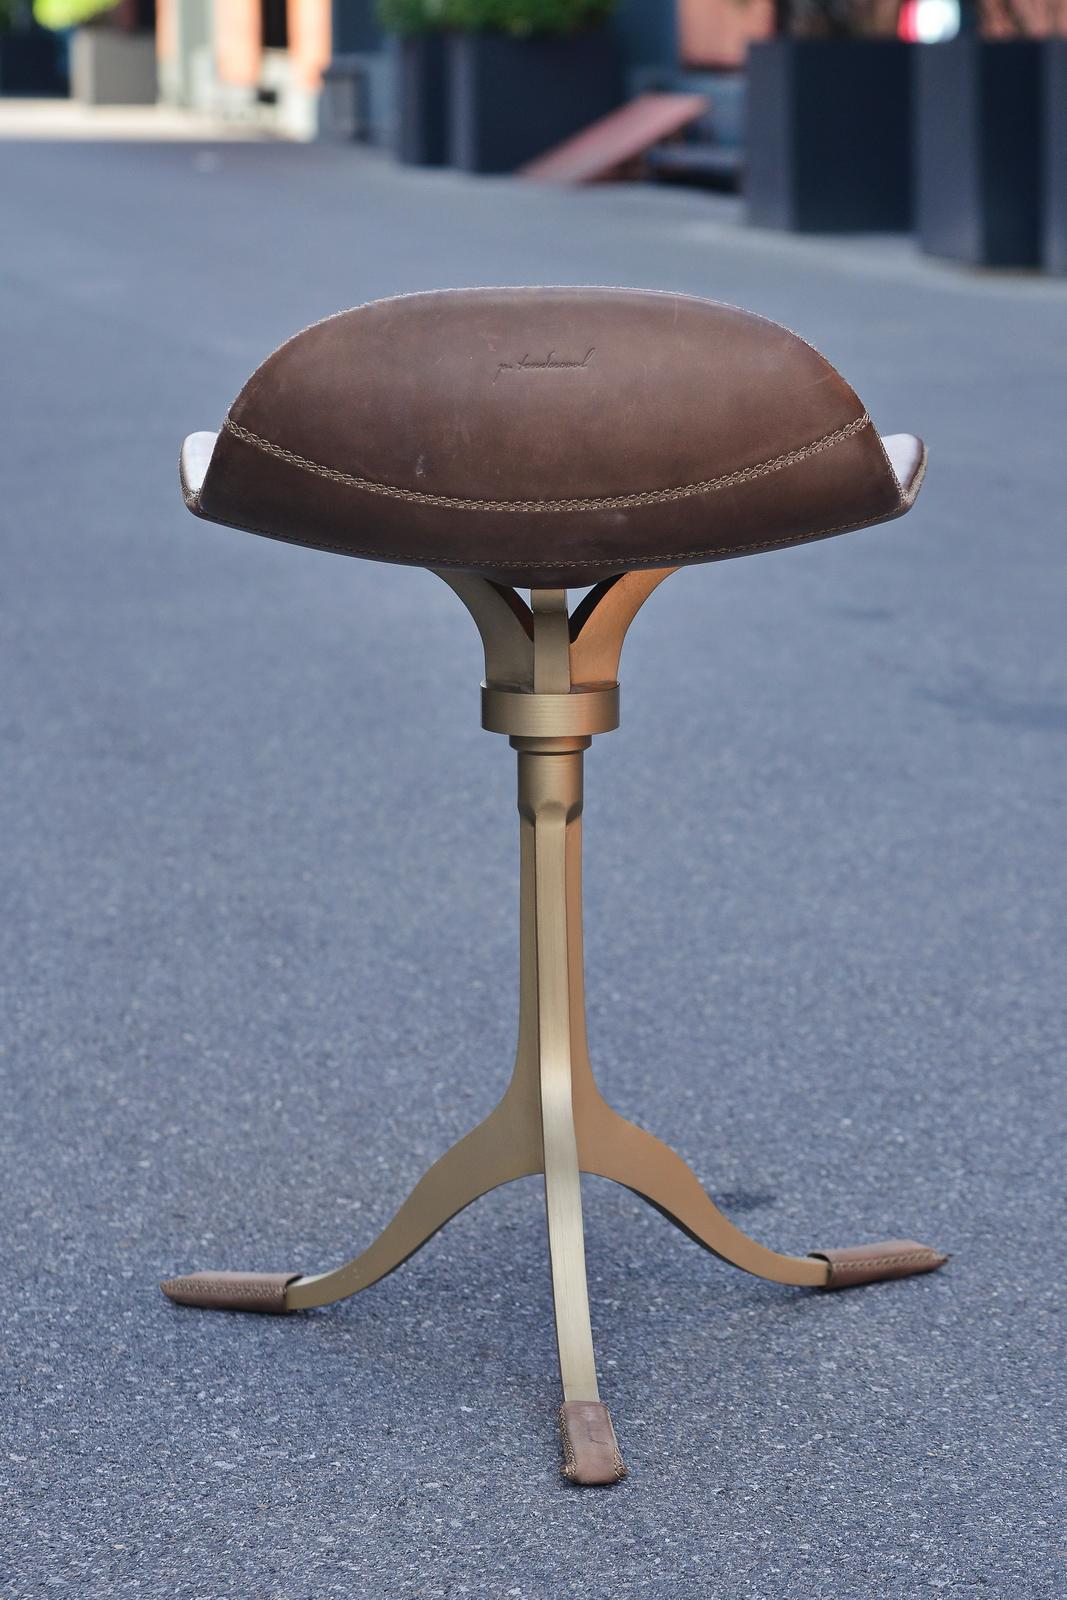 Model: PT48 Stool with swivel  in sand cast brass base
Seat: Leather
Seat color: Leather of your choice 
Base: PT48 base, with swivels and hand cast brass
Base finish: Golden sand 
Dimensions: 52 x 50 x 66 cm (seat height 54cm)
(W x D x H) 20.5 x